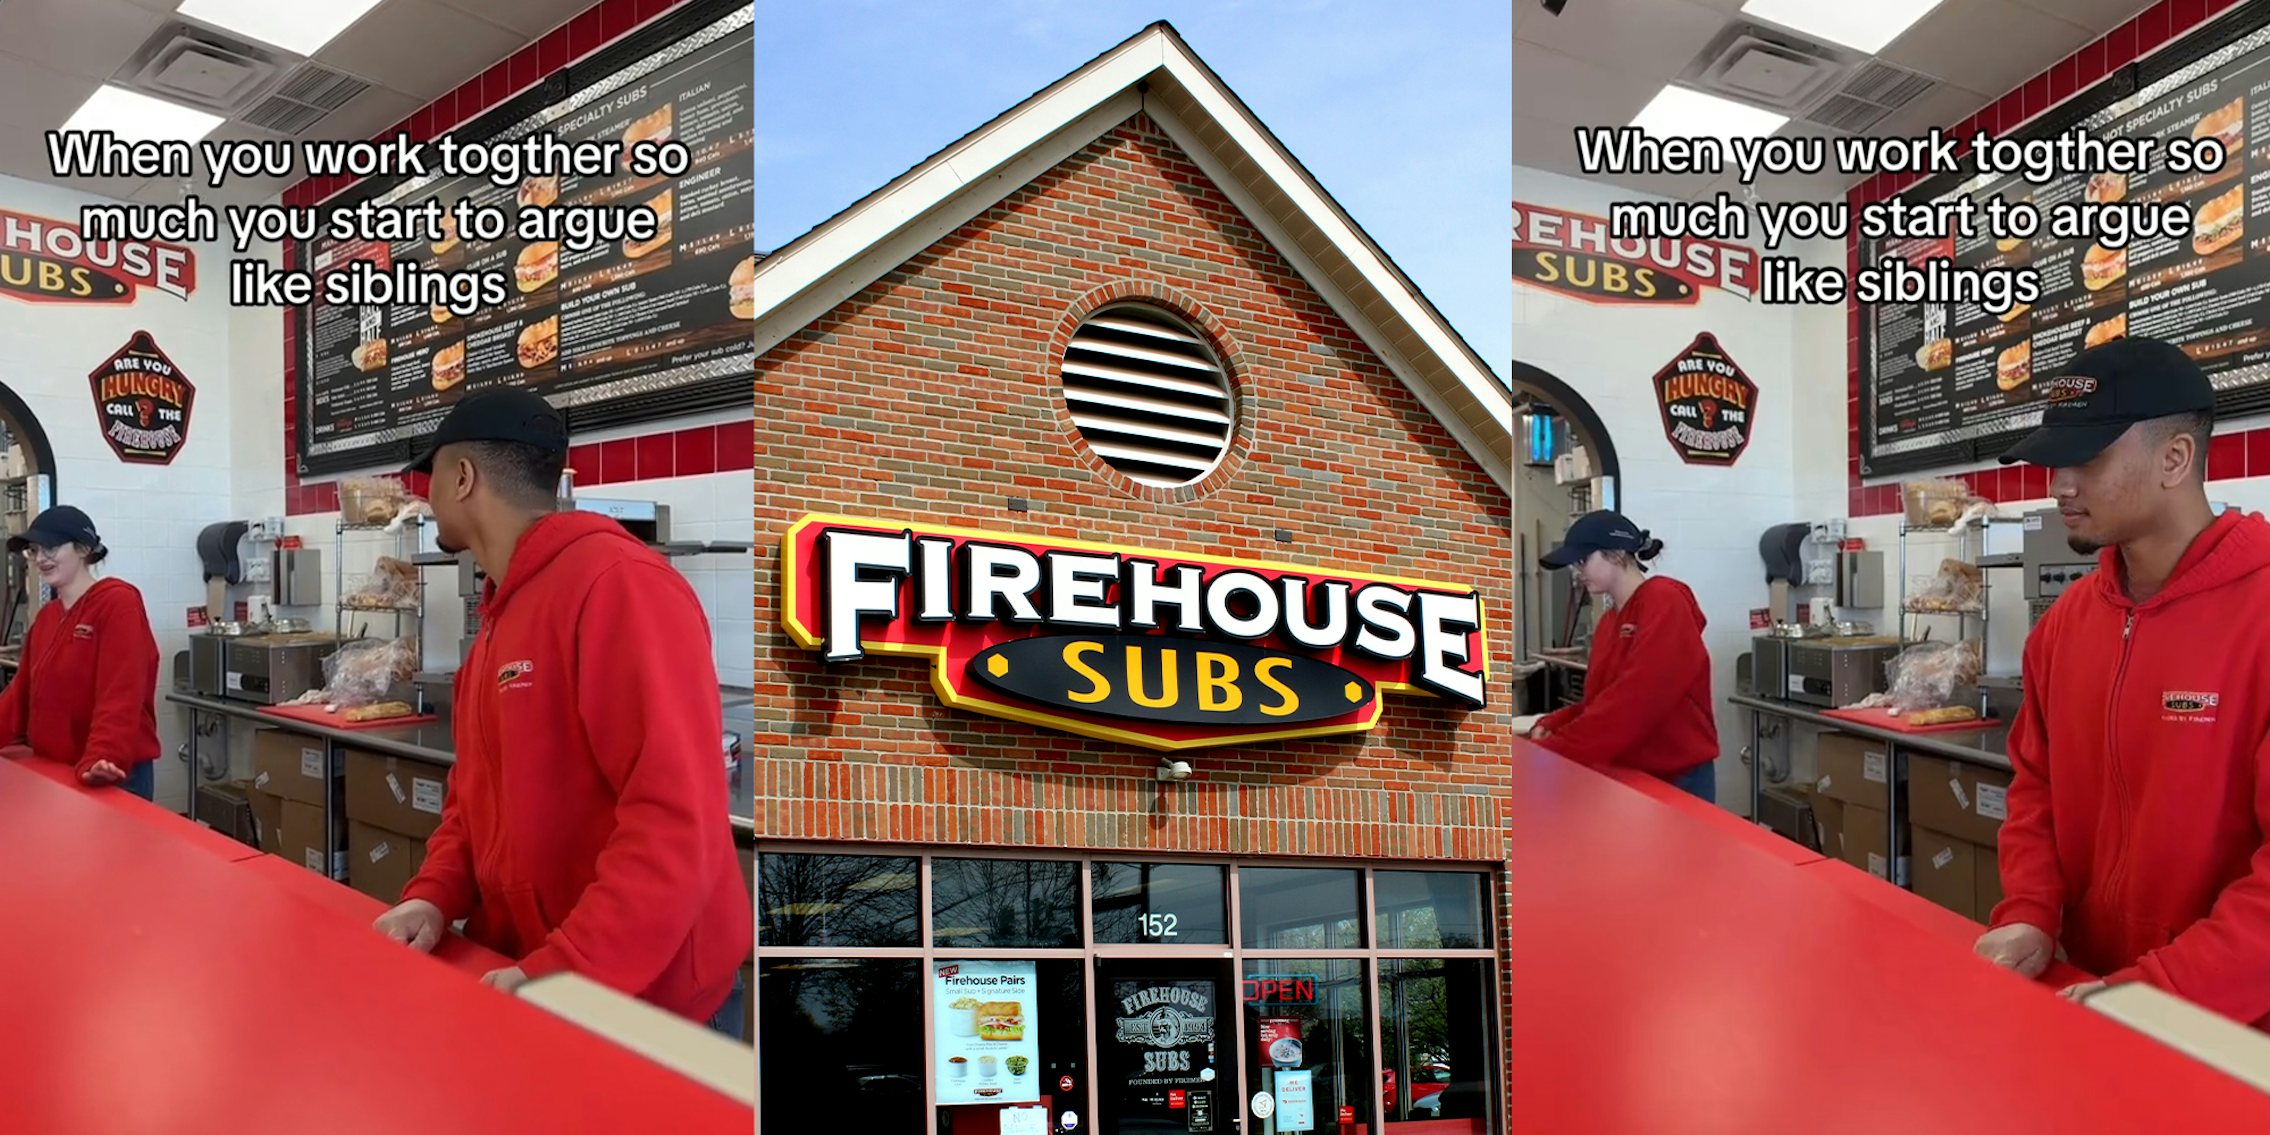 Firehouse Subs worker says she argues with co-worker like siblings